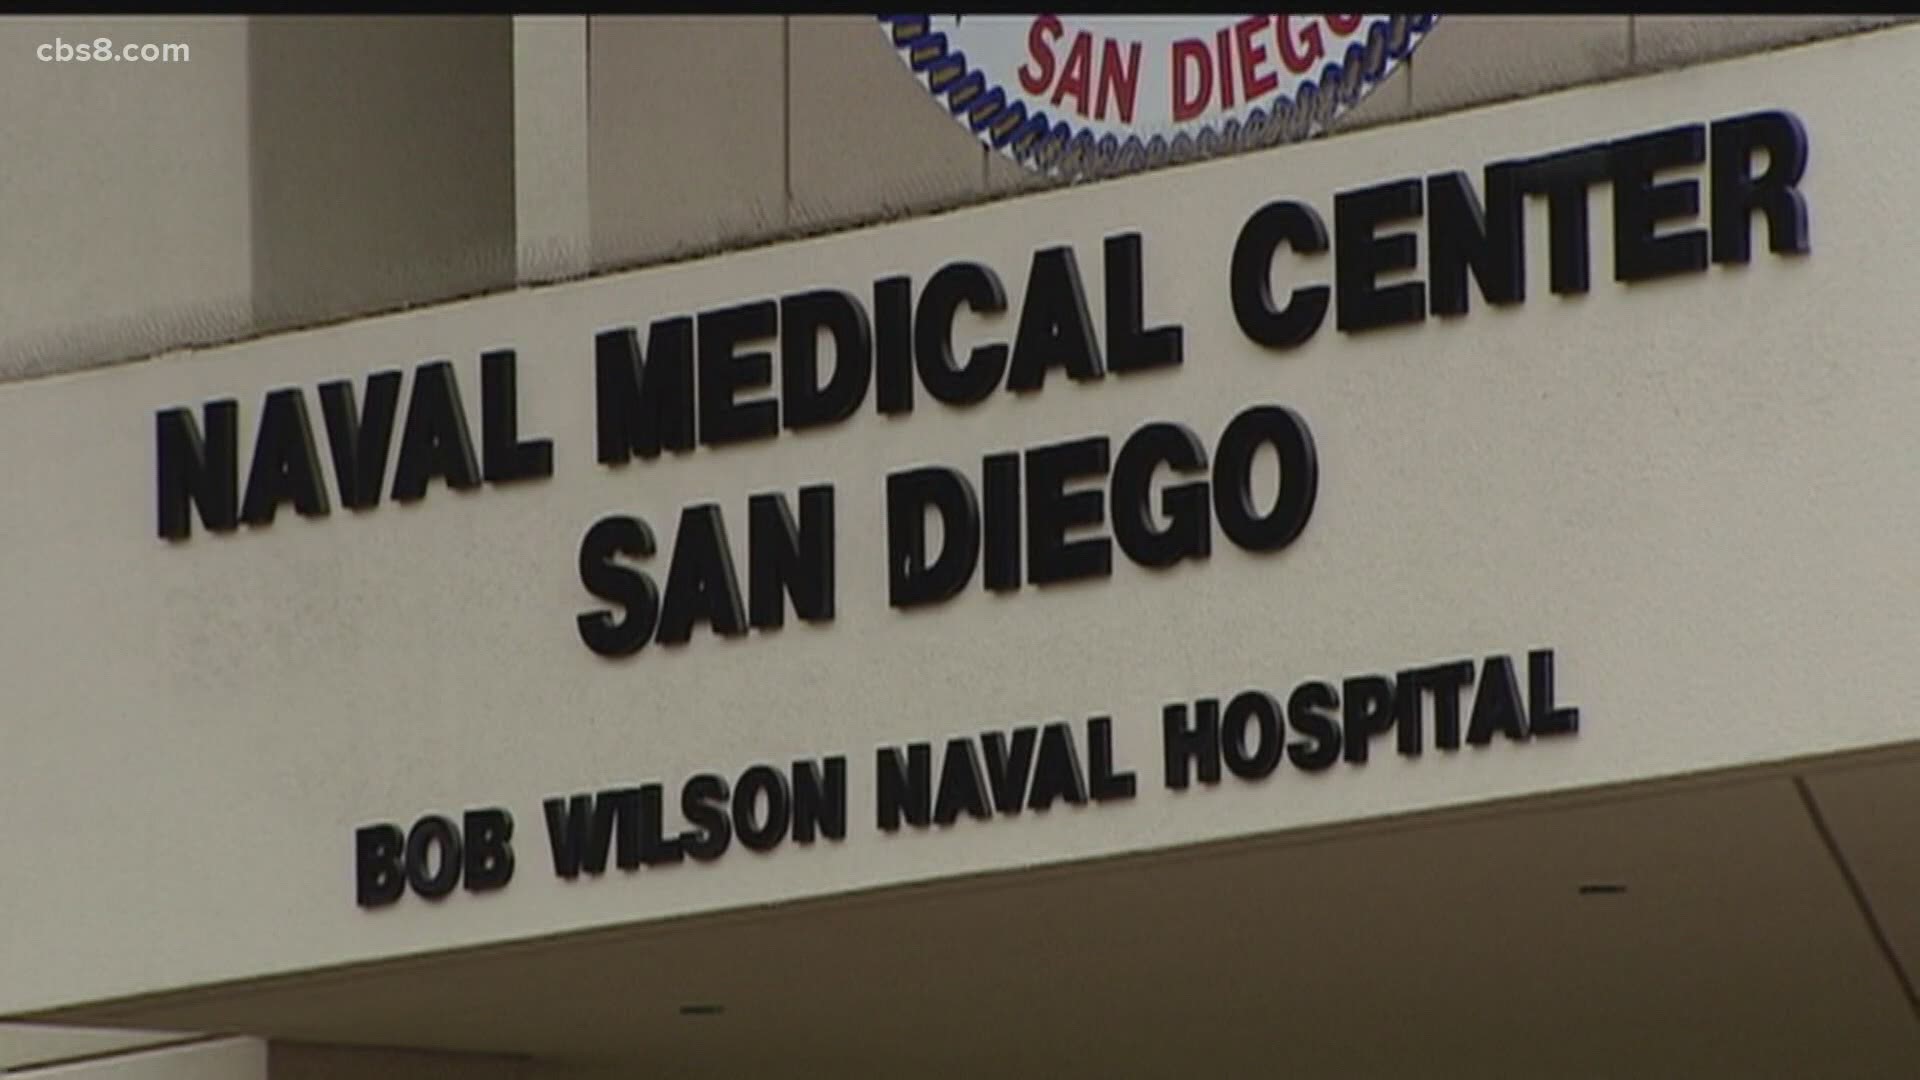 Naval Medical Center San Diego received the first shipment of vaccines Monday, with front-line medical workers and essential mission personnel to receive first doses